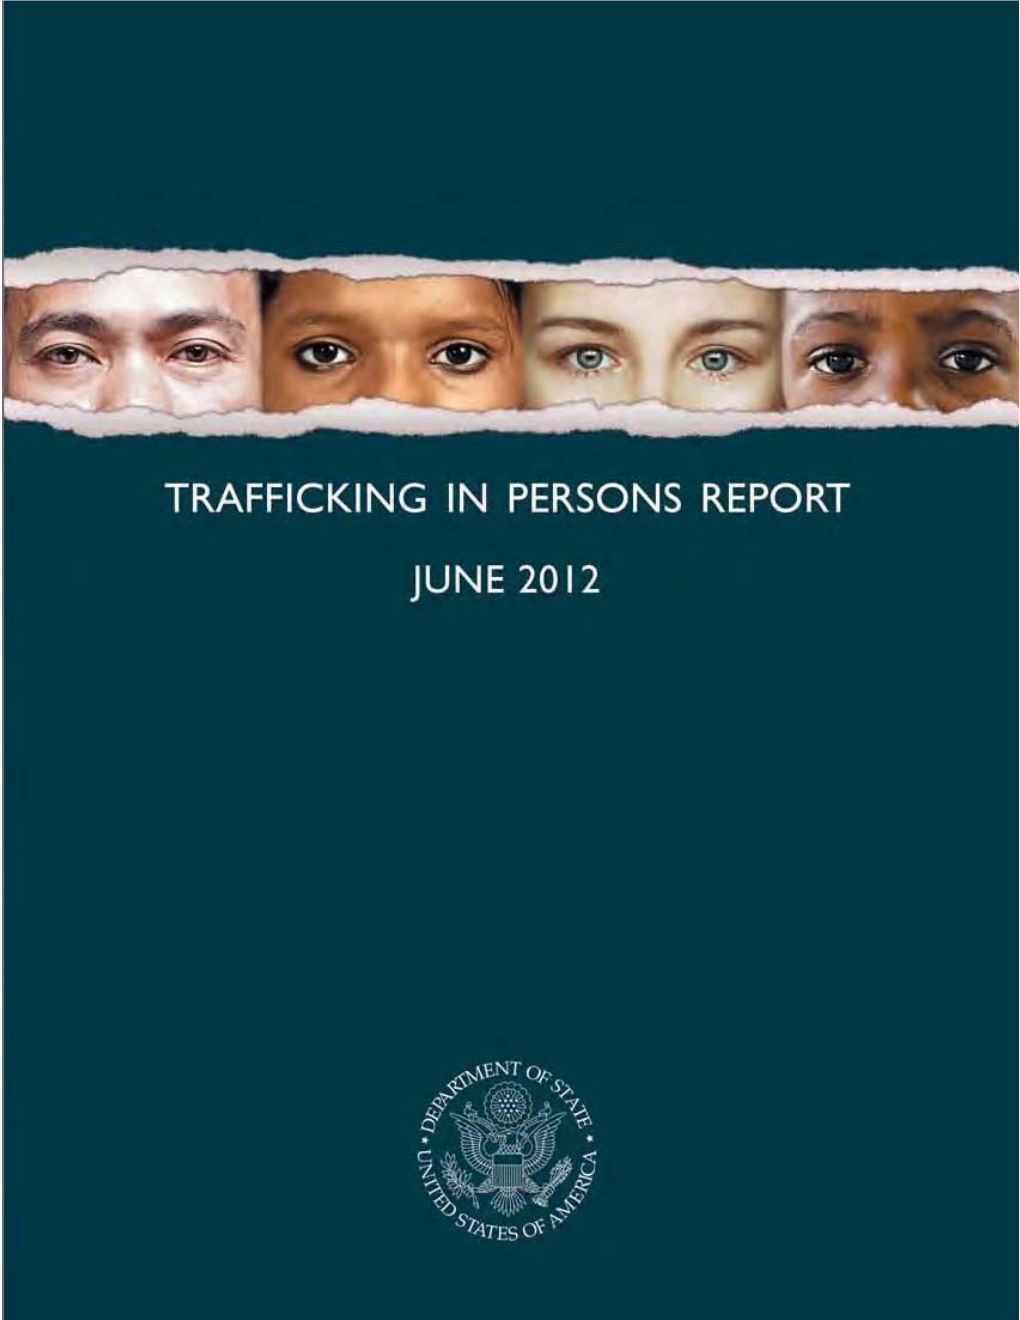 Trafficking in Persons Report June 2012